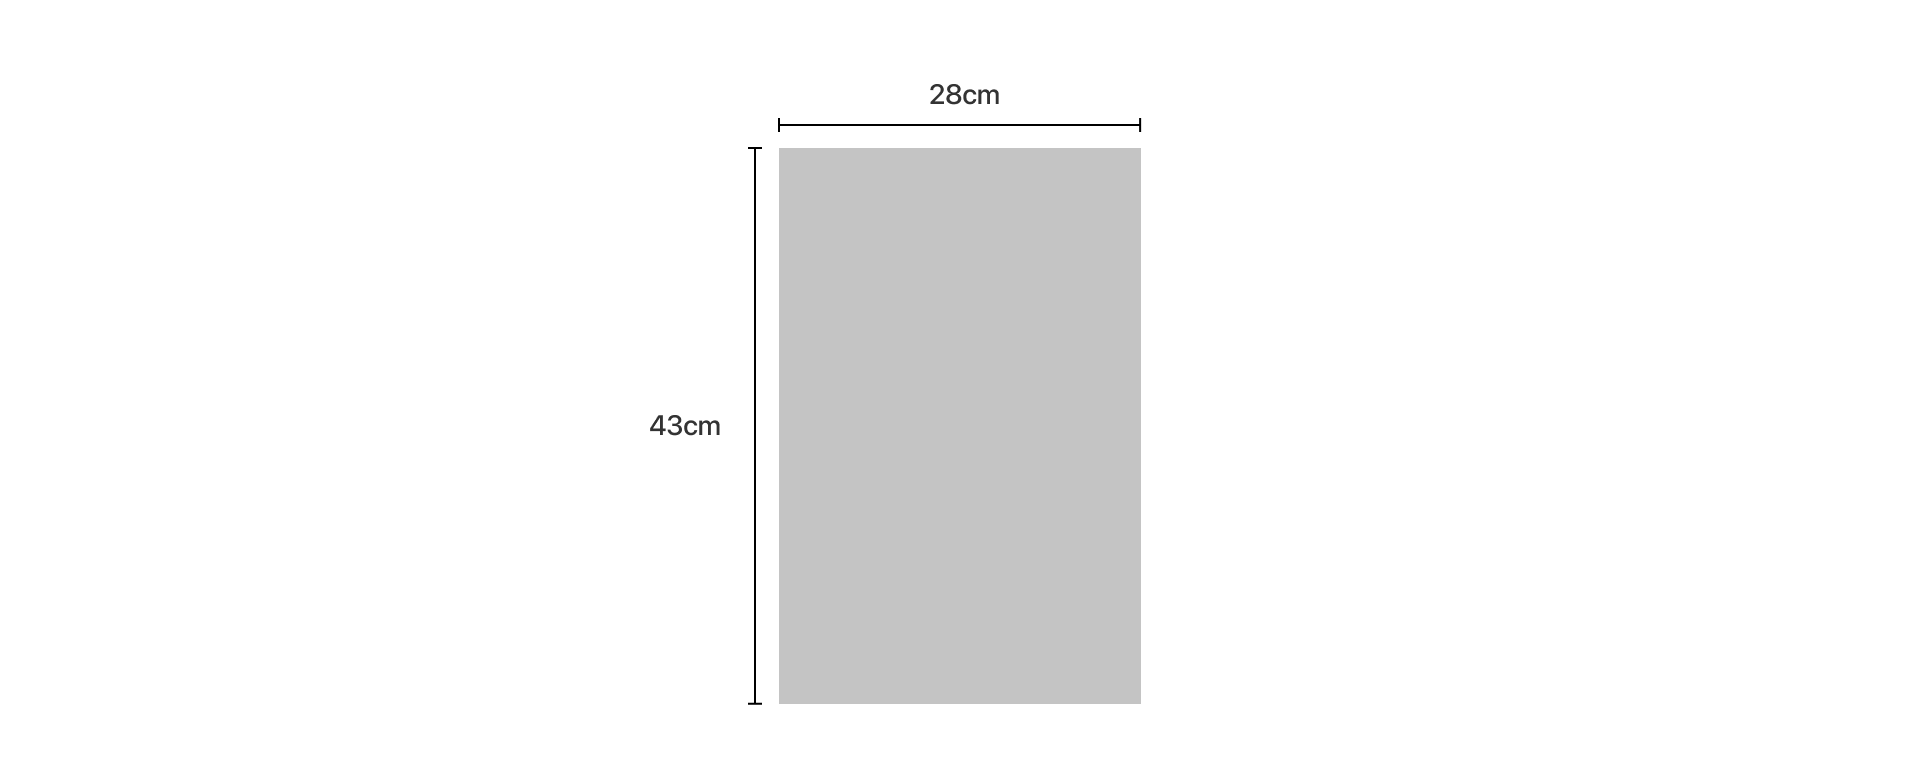 Simple graphic of a rectangle with dimensions 28cm by 43cm